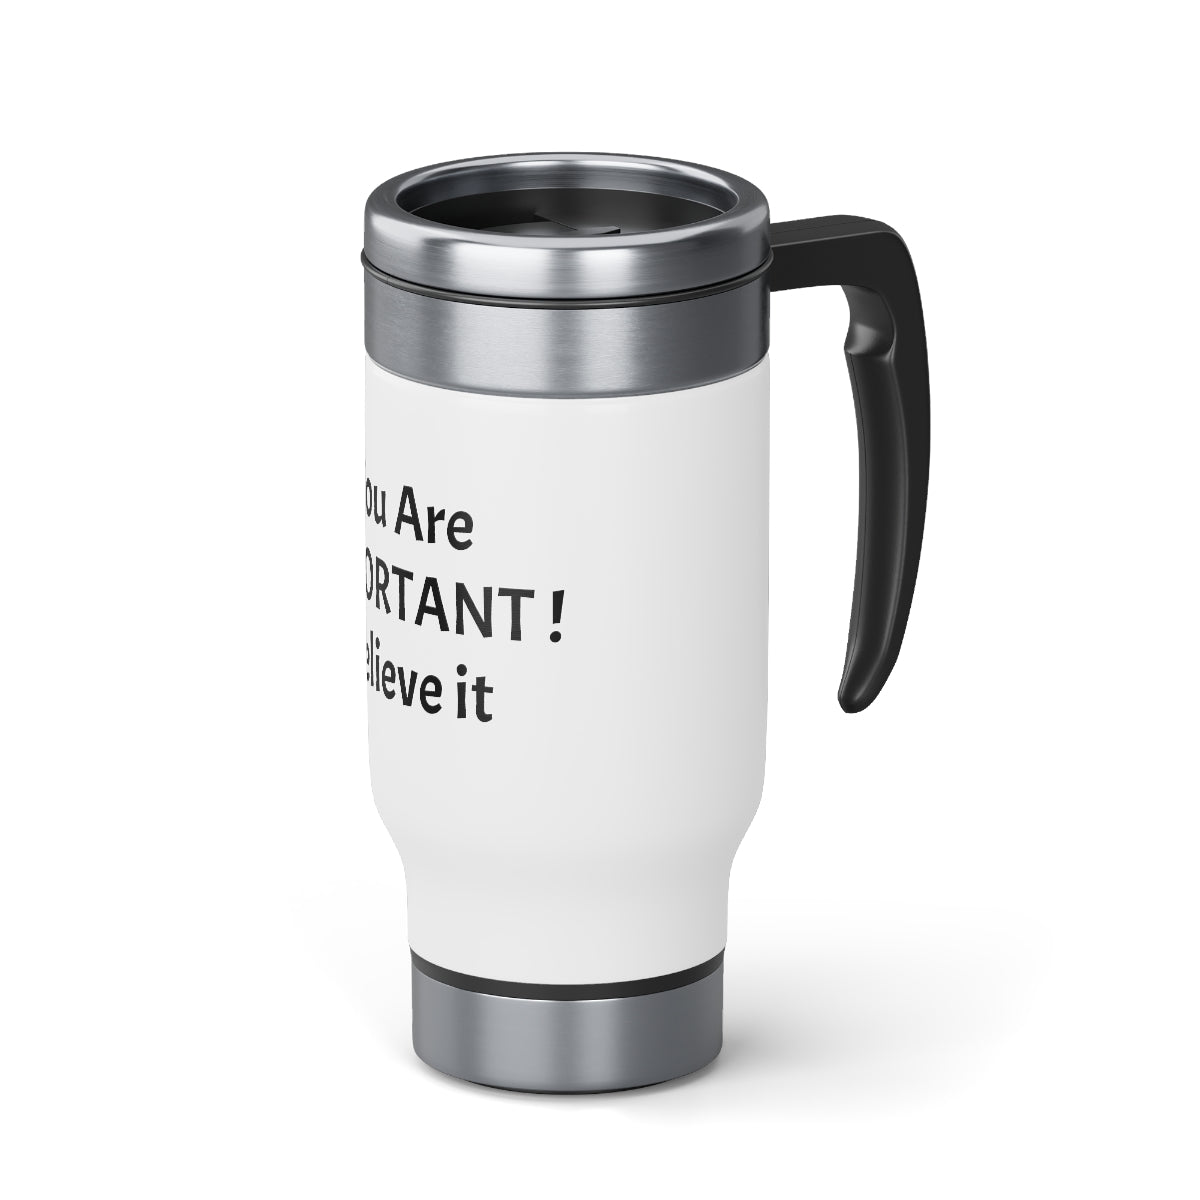 You Are Important! Stainless Steel Travel Mug with Handle, 14oz